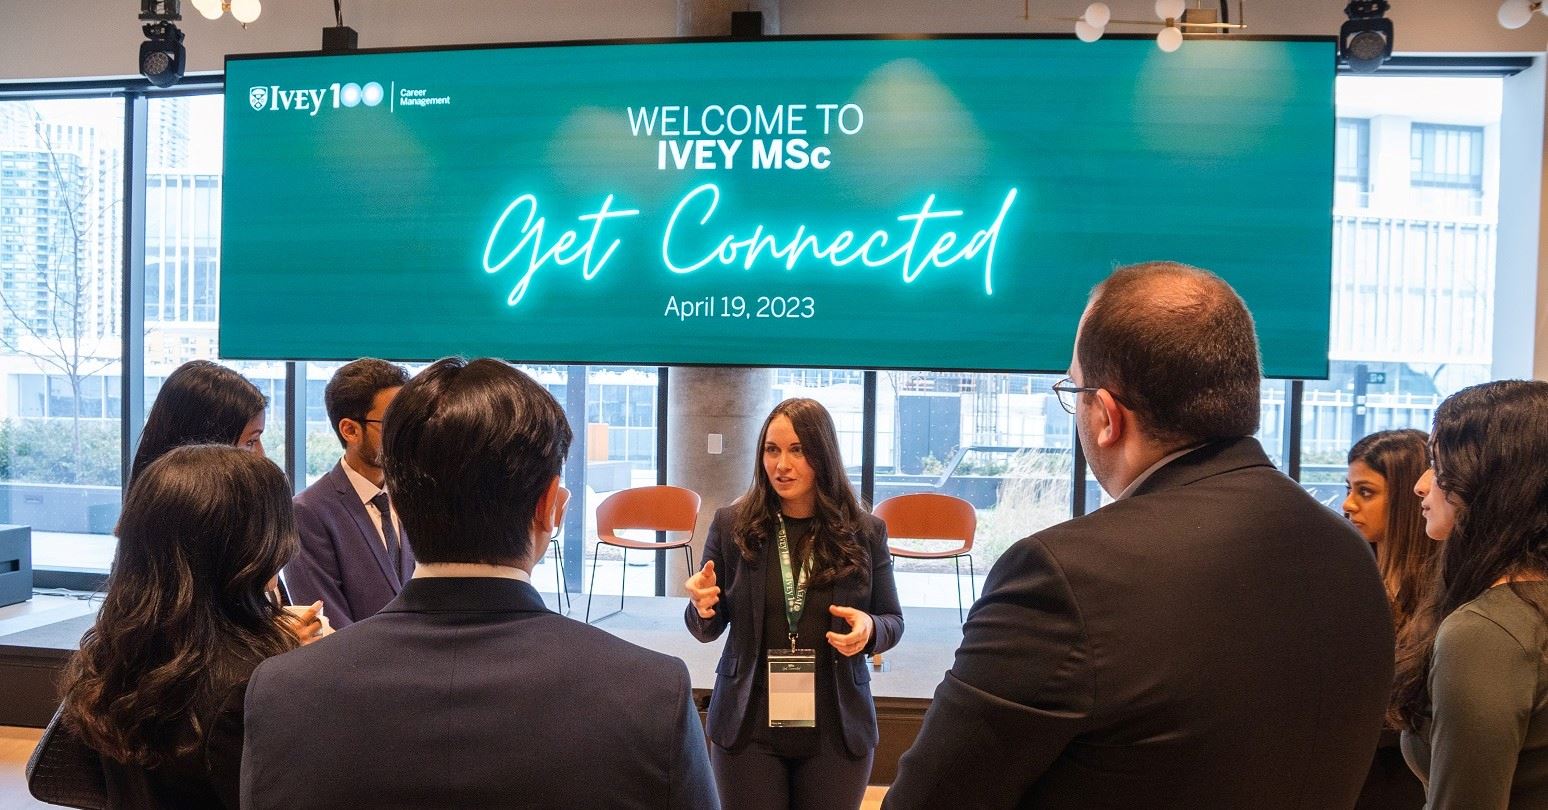 MSc Get Connected